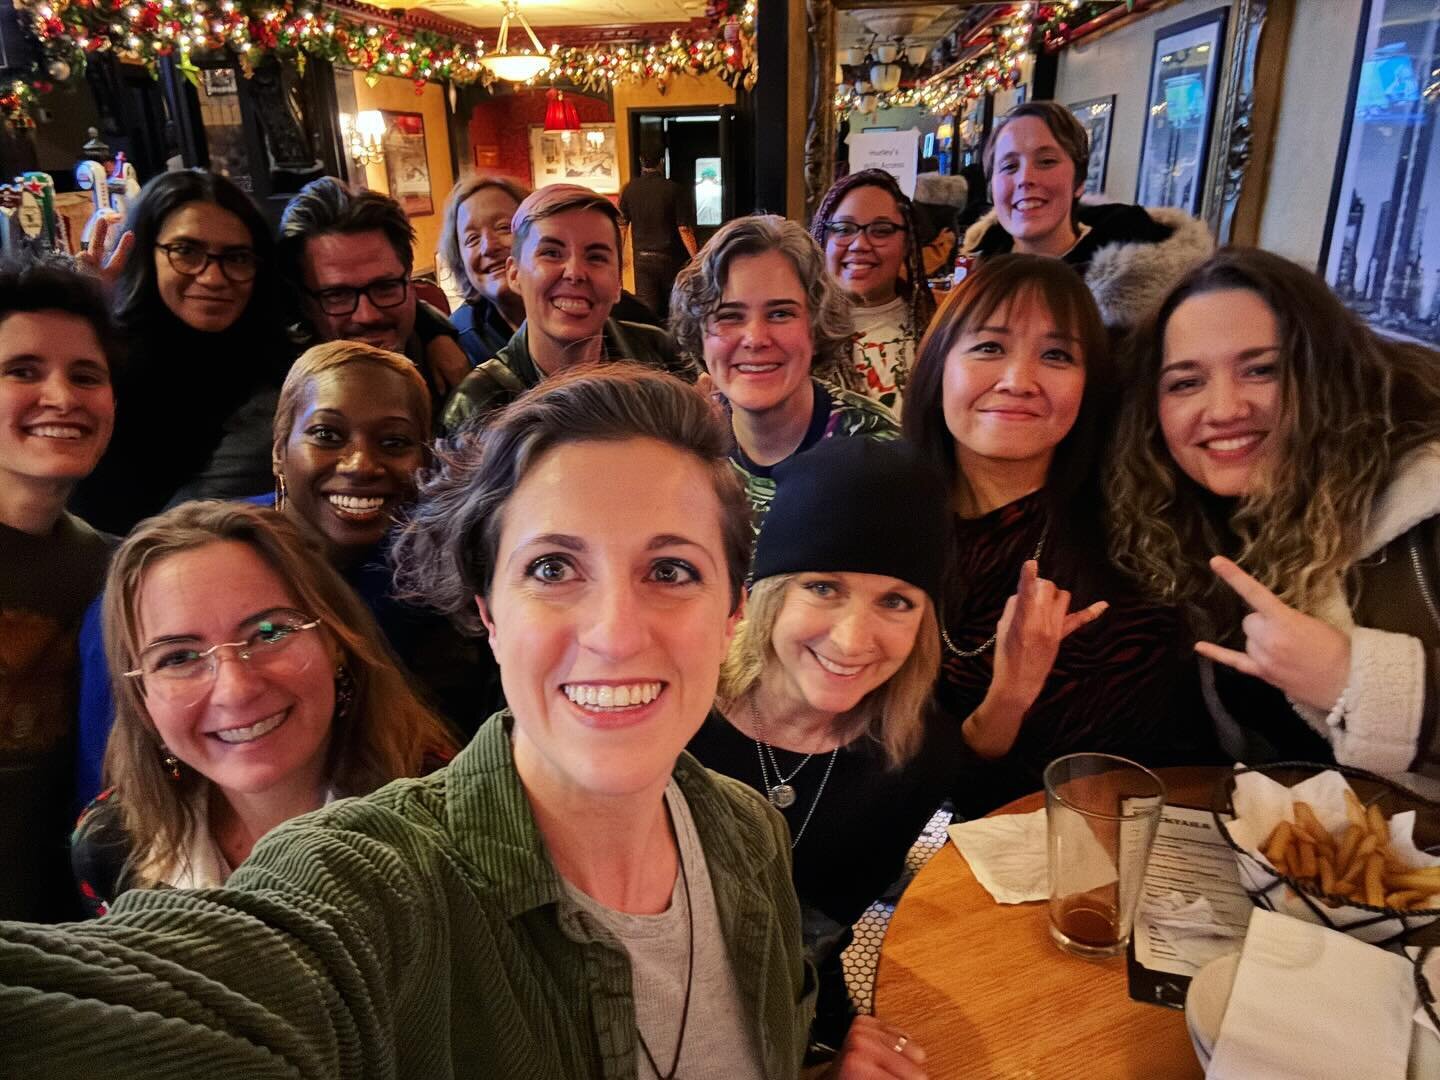 Our first SIX SUB HOLIDAY HANG was a success! We are so grateful to this group for stepping in to cover for us when we need - we couldn&rsquo;t do this show without them! Show them some love ❤️

#sixbroadway #nycmusicians #ladiesinwaiting @musicians_